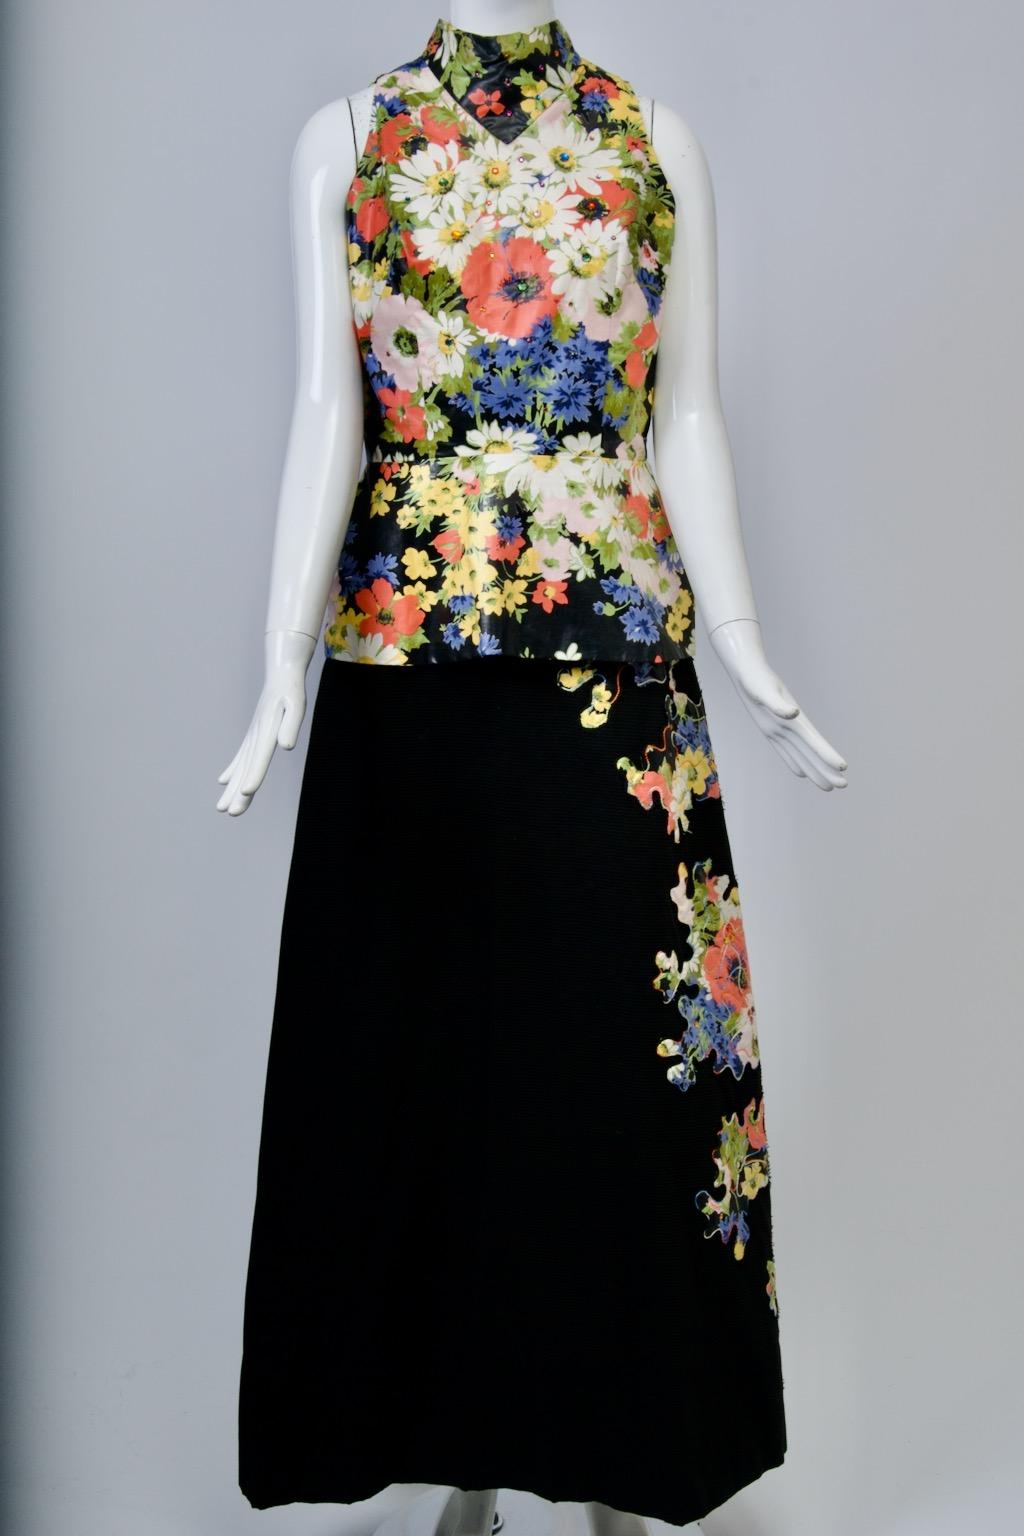 A unique vintage find, this ensemble consists of a long black maxi skirt and sleeveless top, its floral design repeated in cut-out appliqués down the left side of the skirt. the A-line skirt is composed of a ribbed black cotton-type fabric, while